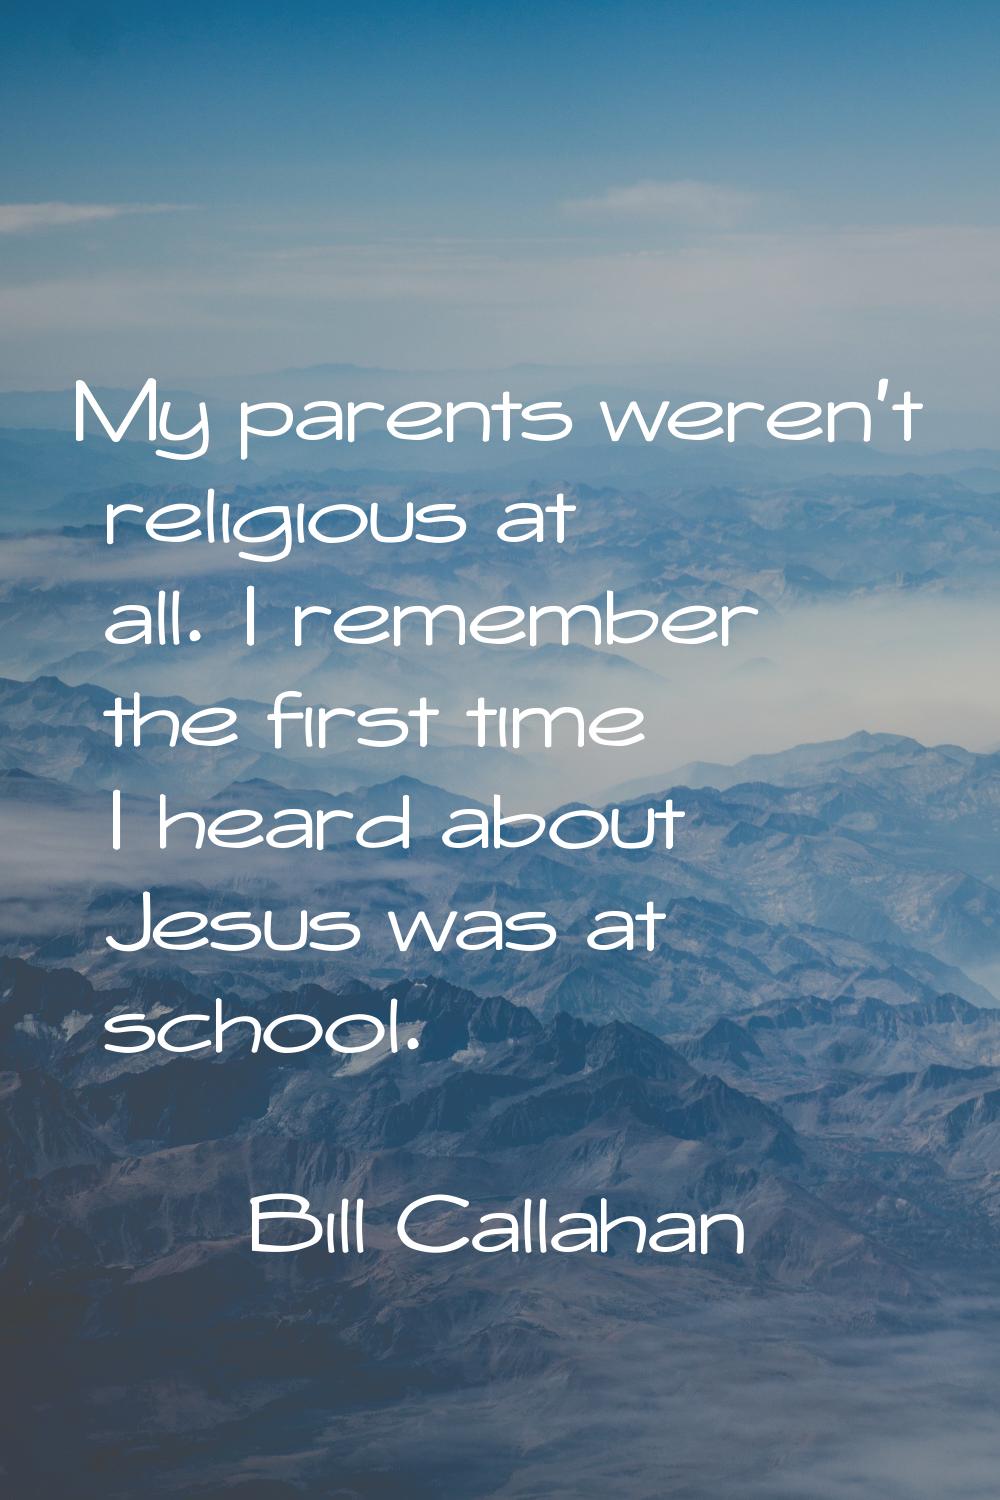 My parents weren't religious at all. I remember the first time I heard about Jesus was at school.